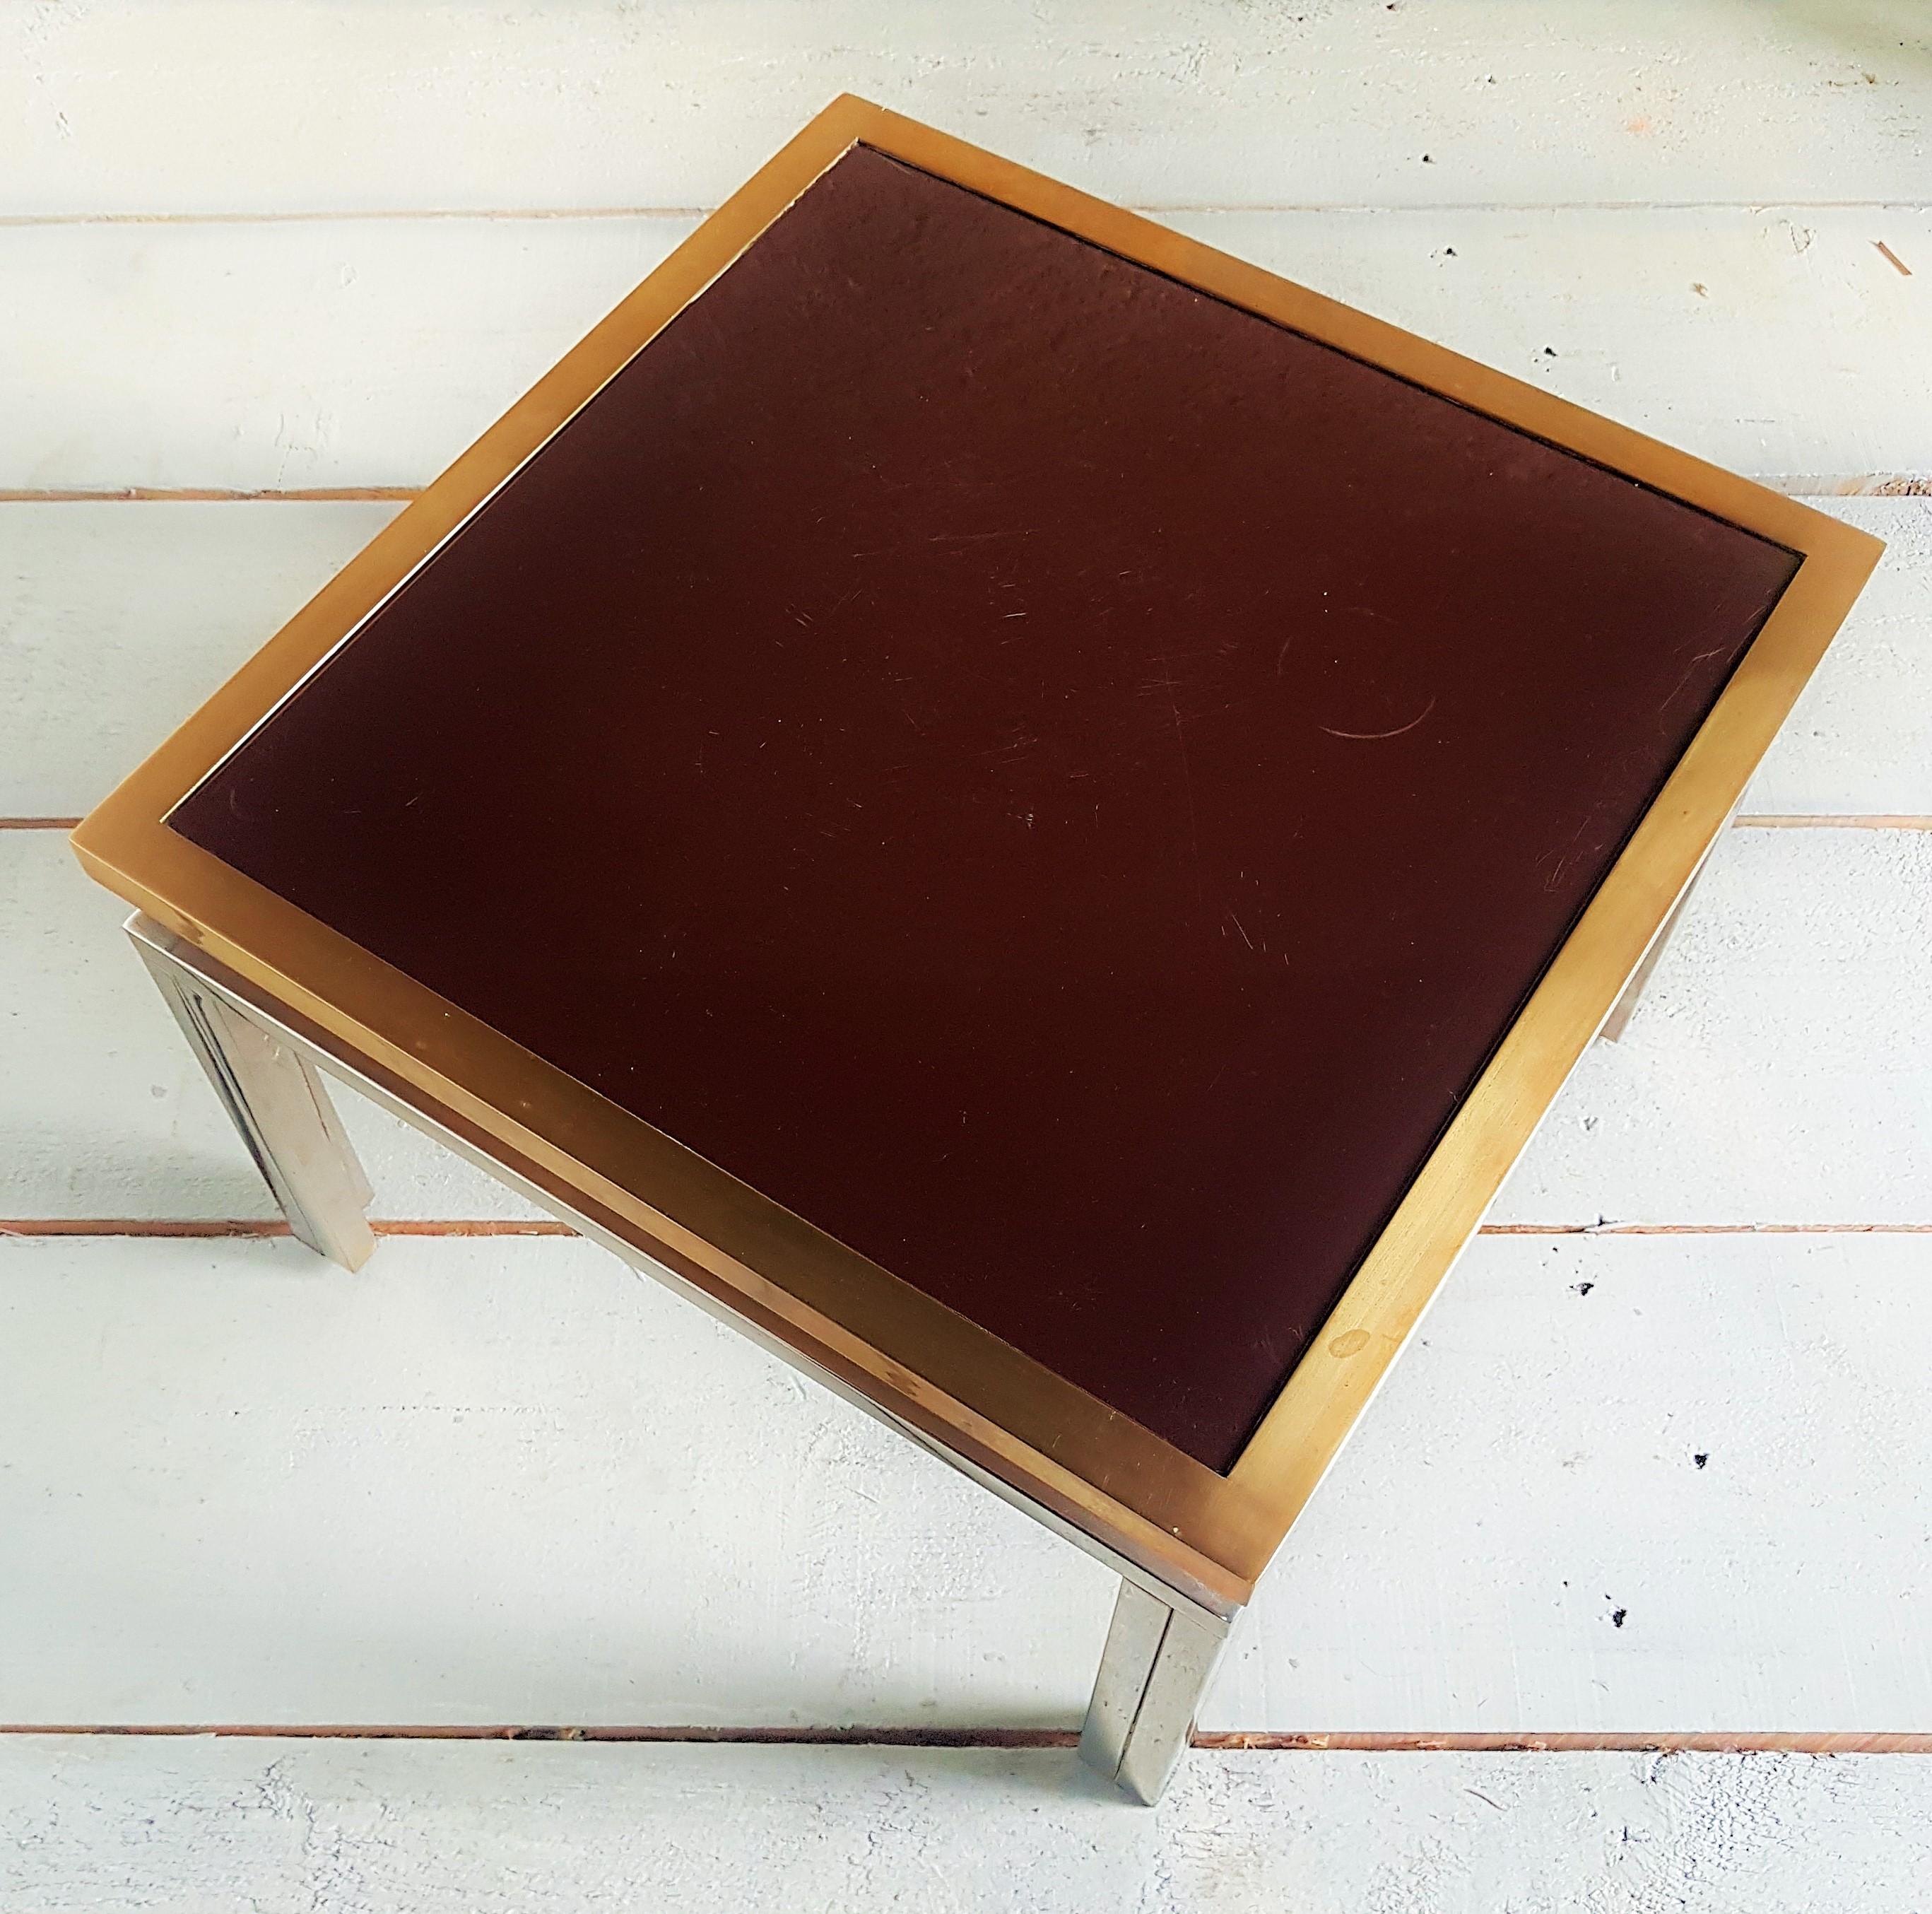 MidCentury Nickel and Brass Side Table by Lefevre for Maison Jansen, France 1970 For Sale 3